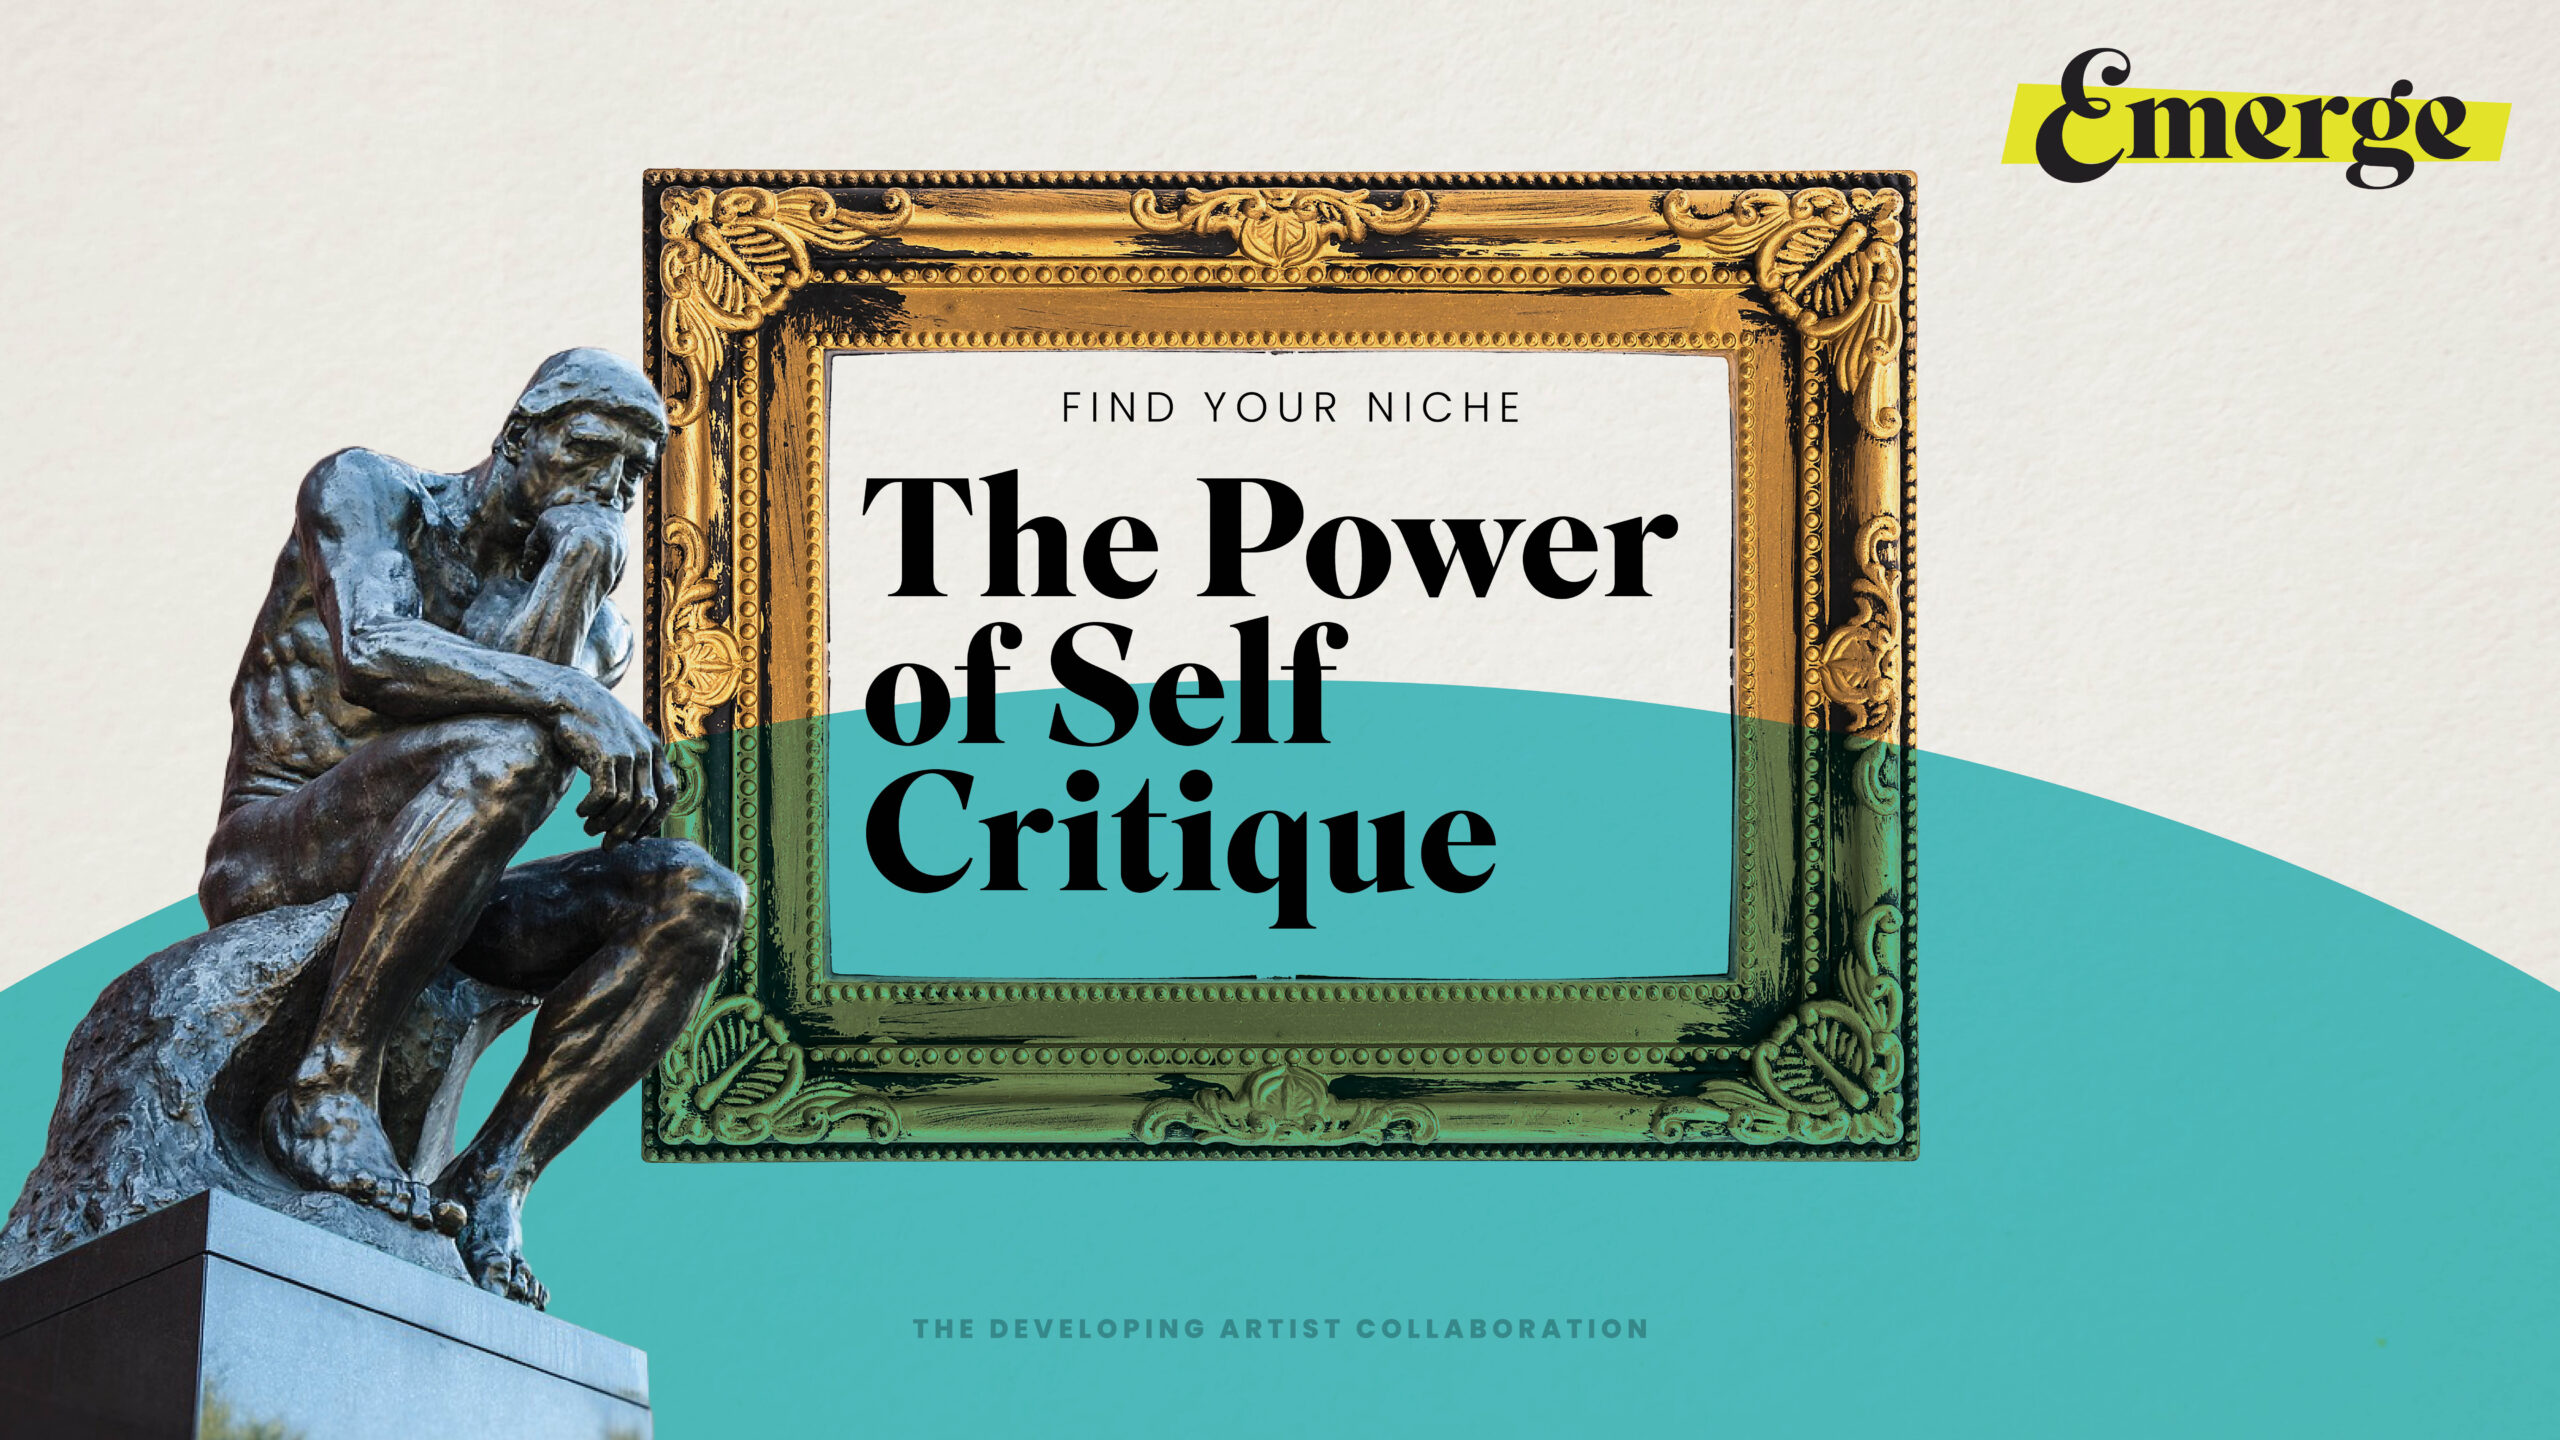 The Power of Self Critique